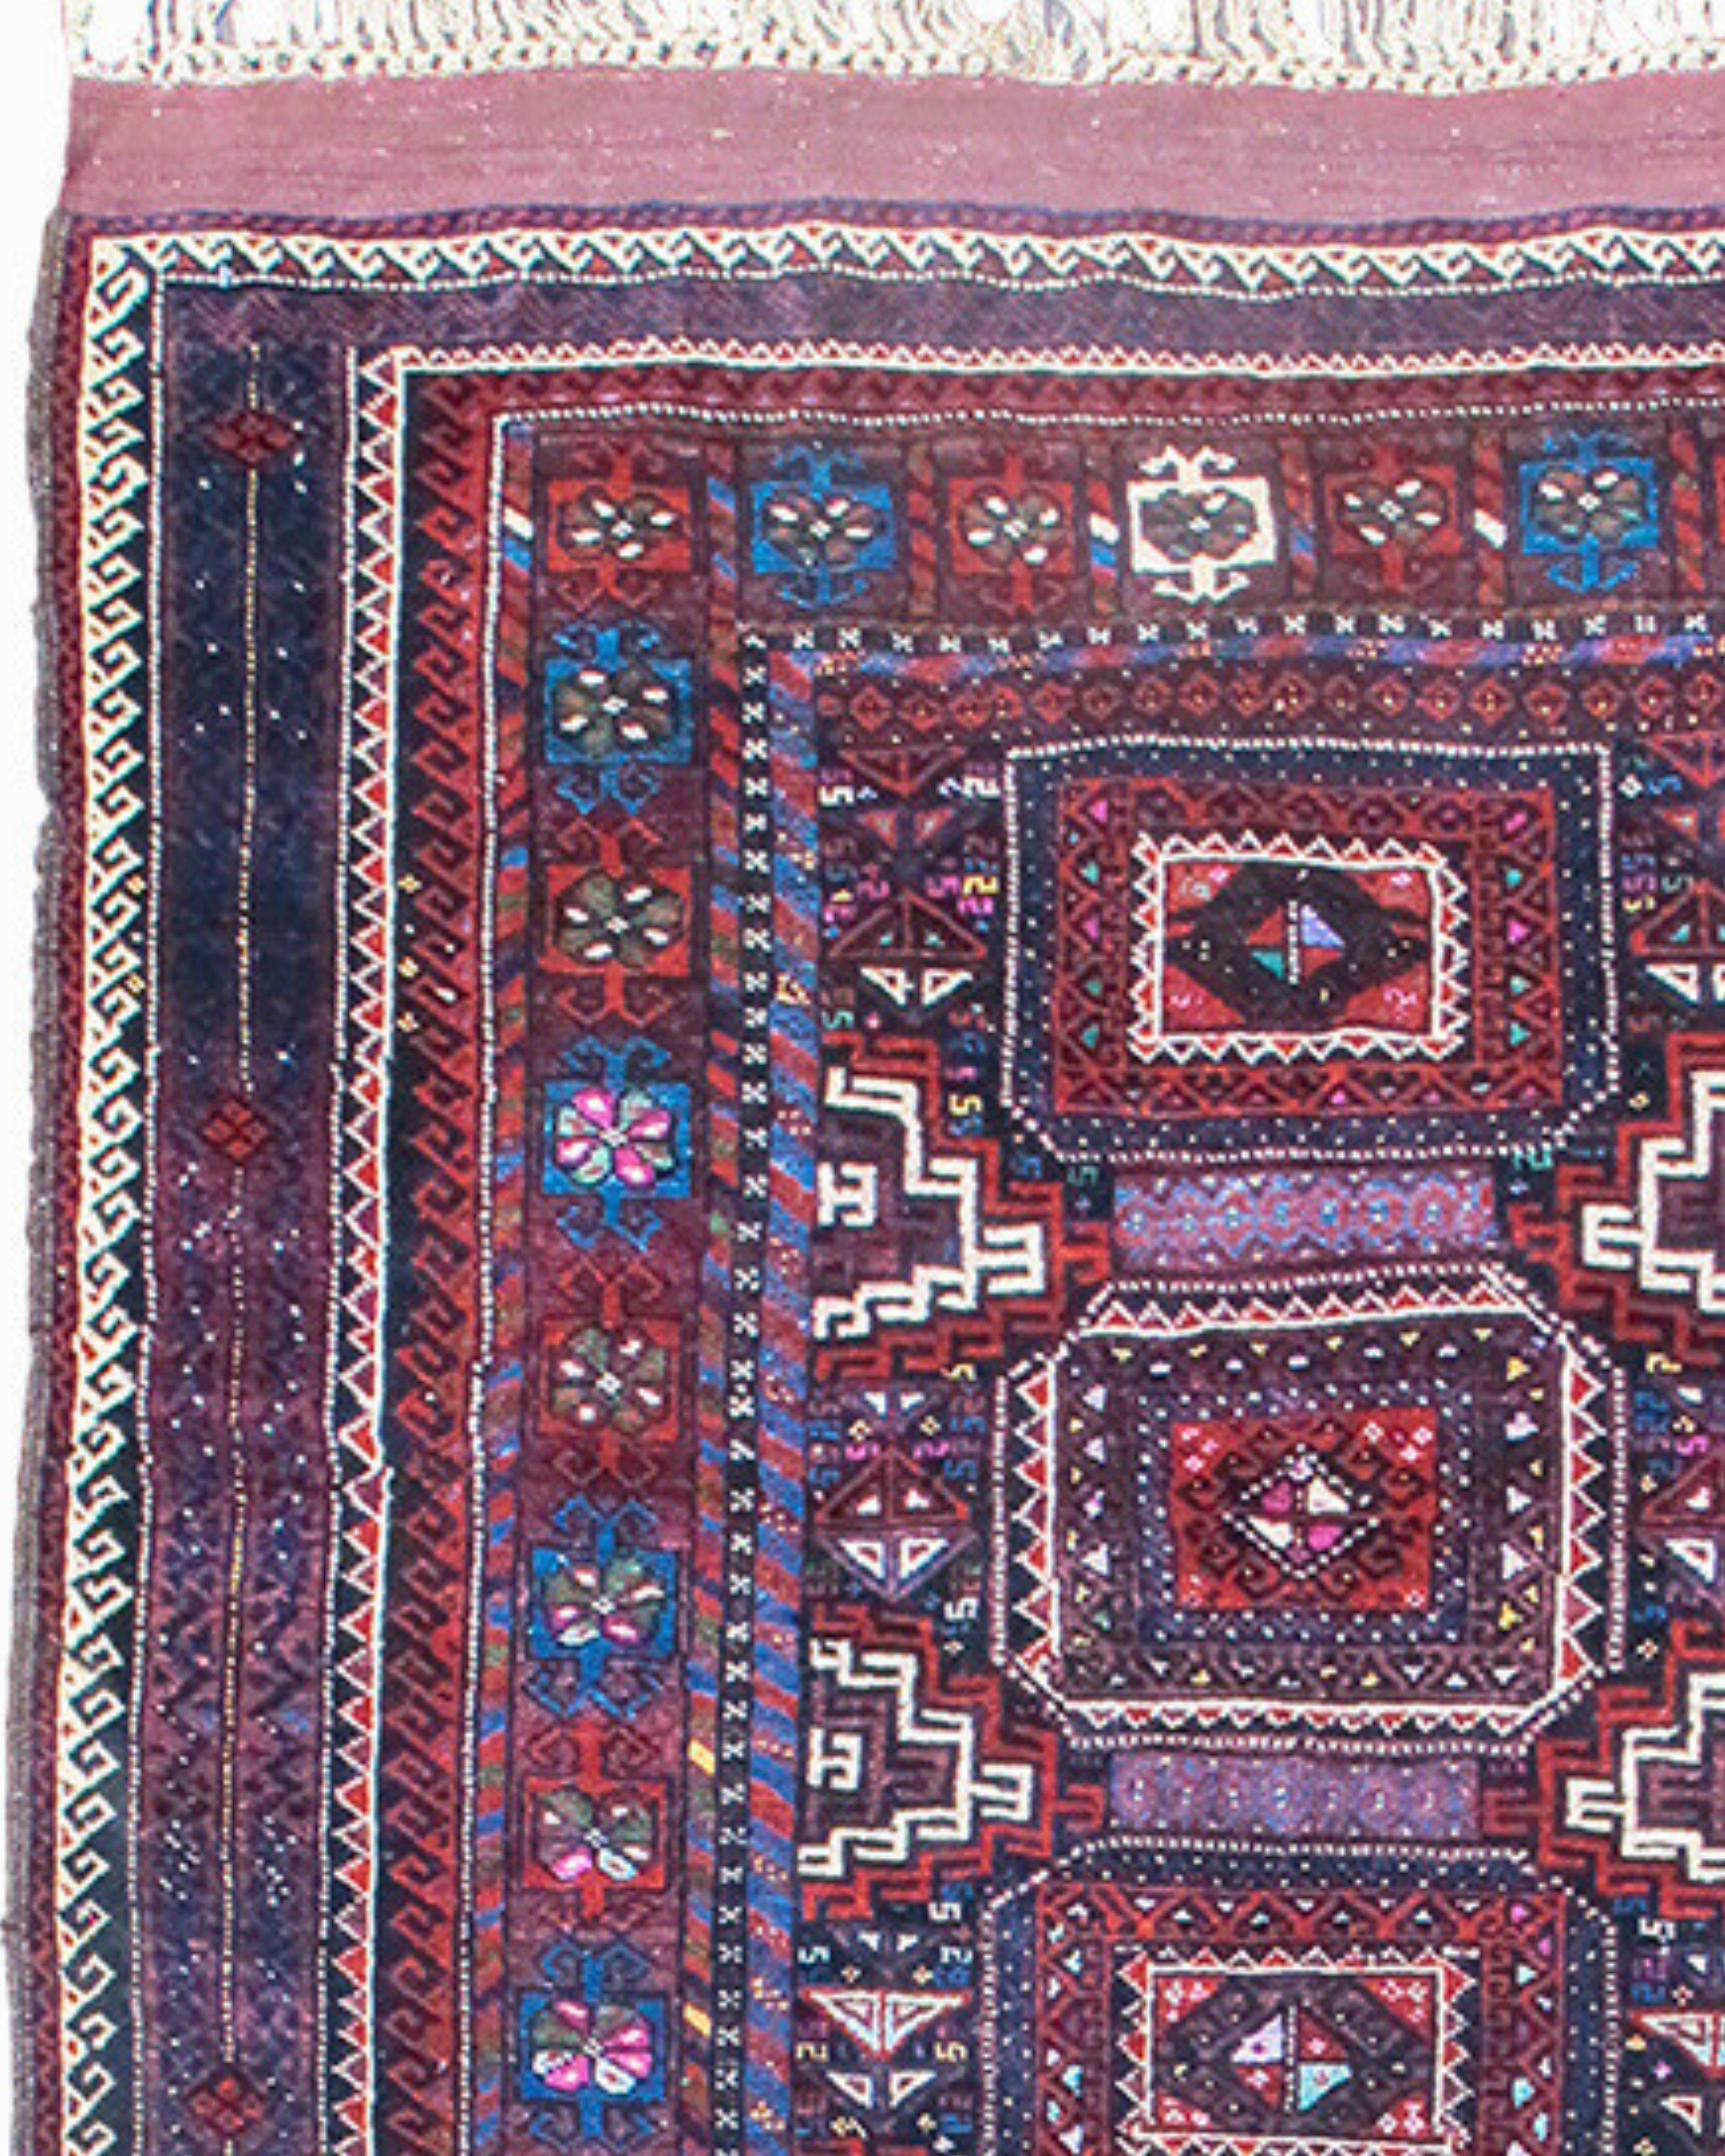 Hand-Woven Antique Afghan Baluch Rug, Early 20th Century For Sale